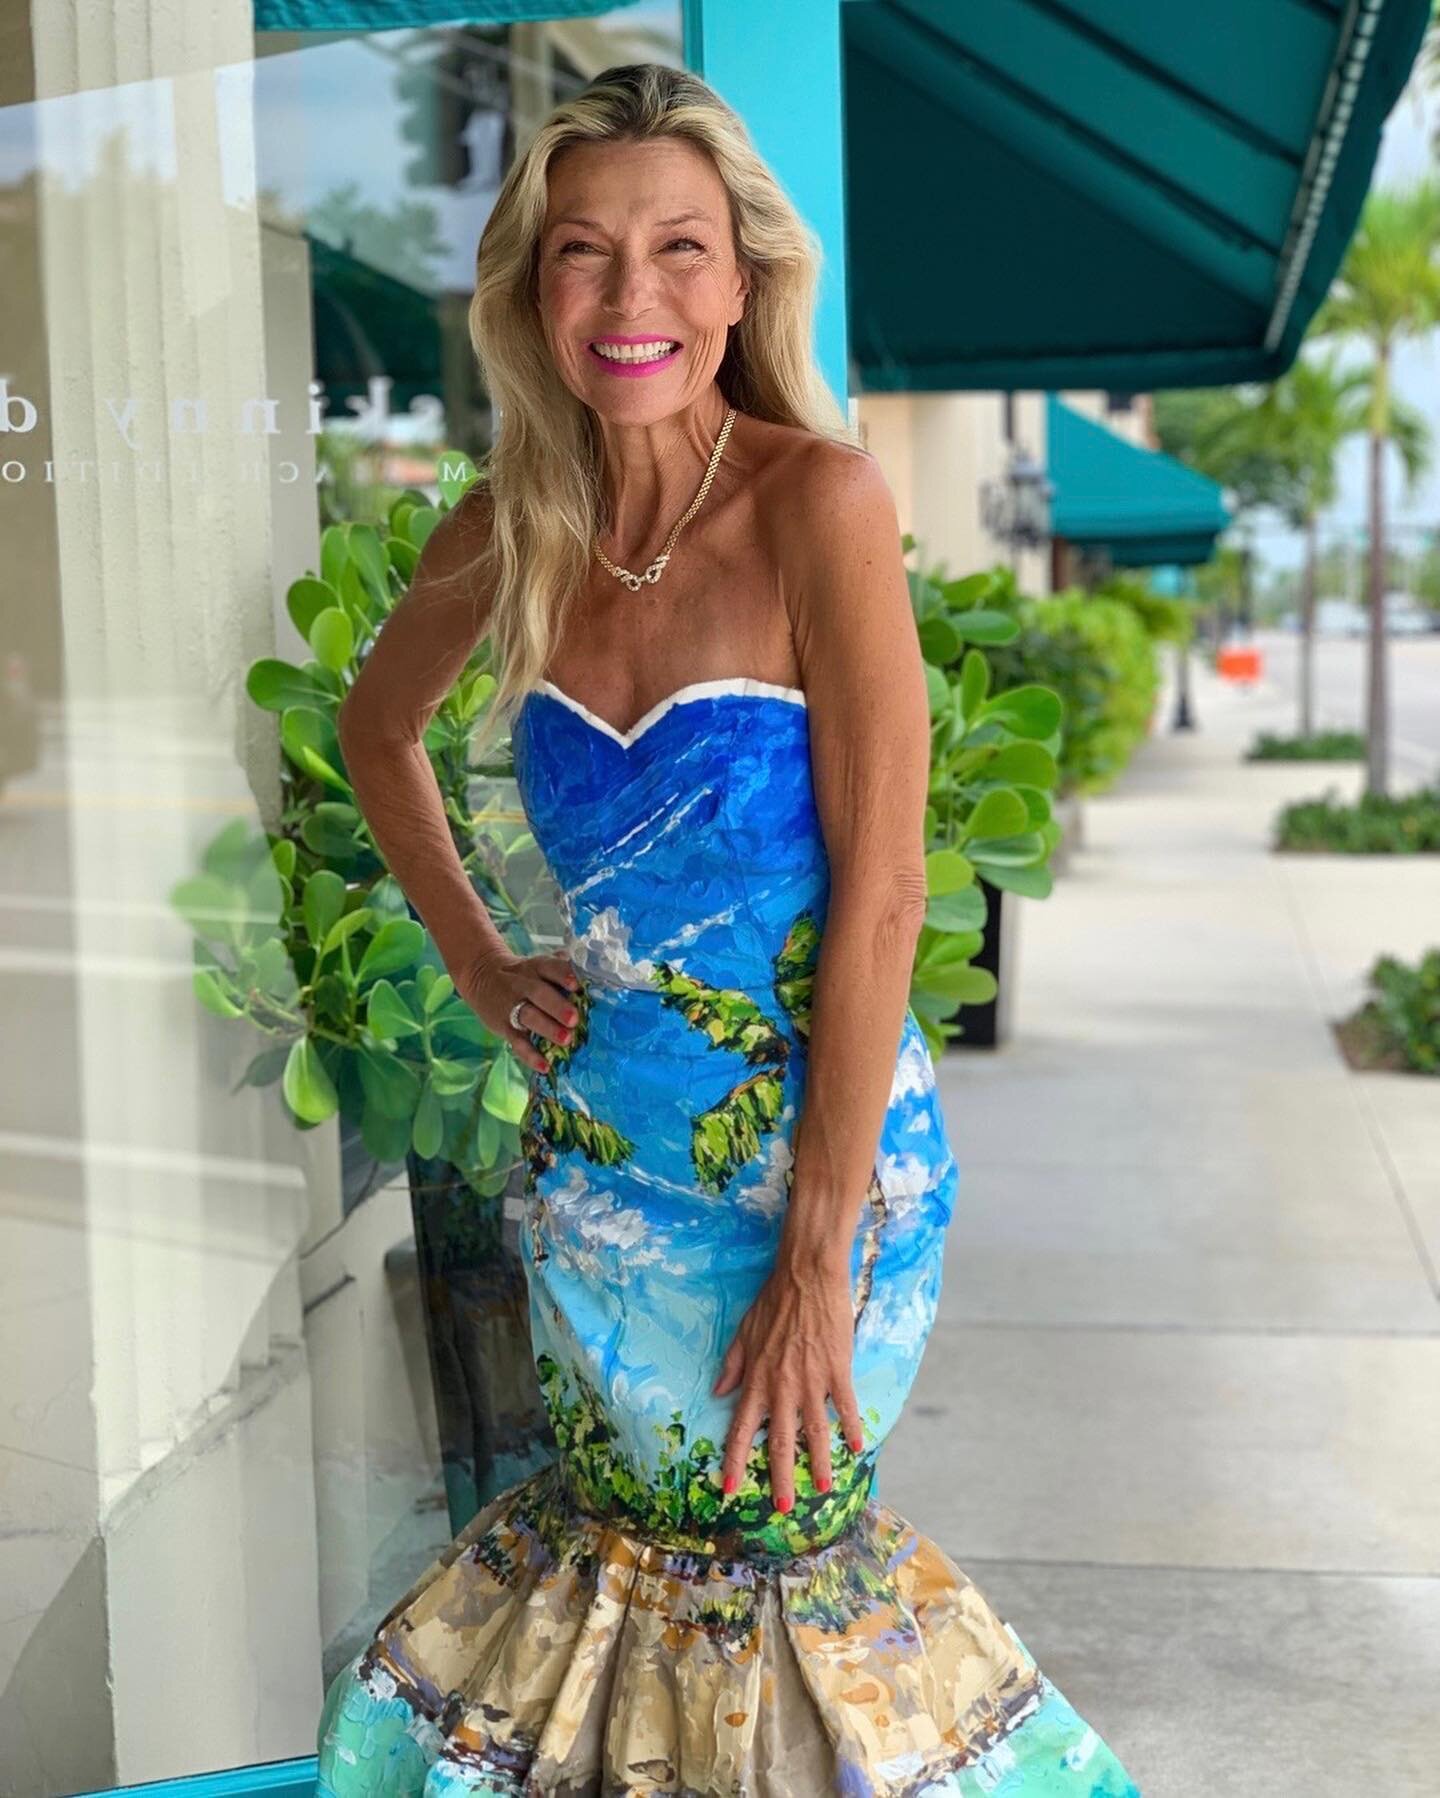 We customize gowns for any size, age, or style! Just visit the link in bio. 
Artwork by Sarah LaPierre @thickpaint
-
#vivrecouture #handpaintedgown #artistsofinstagram #customdress #uniqueoutfit #handpaintedfashion #customize